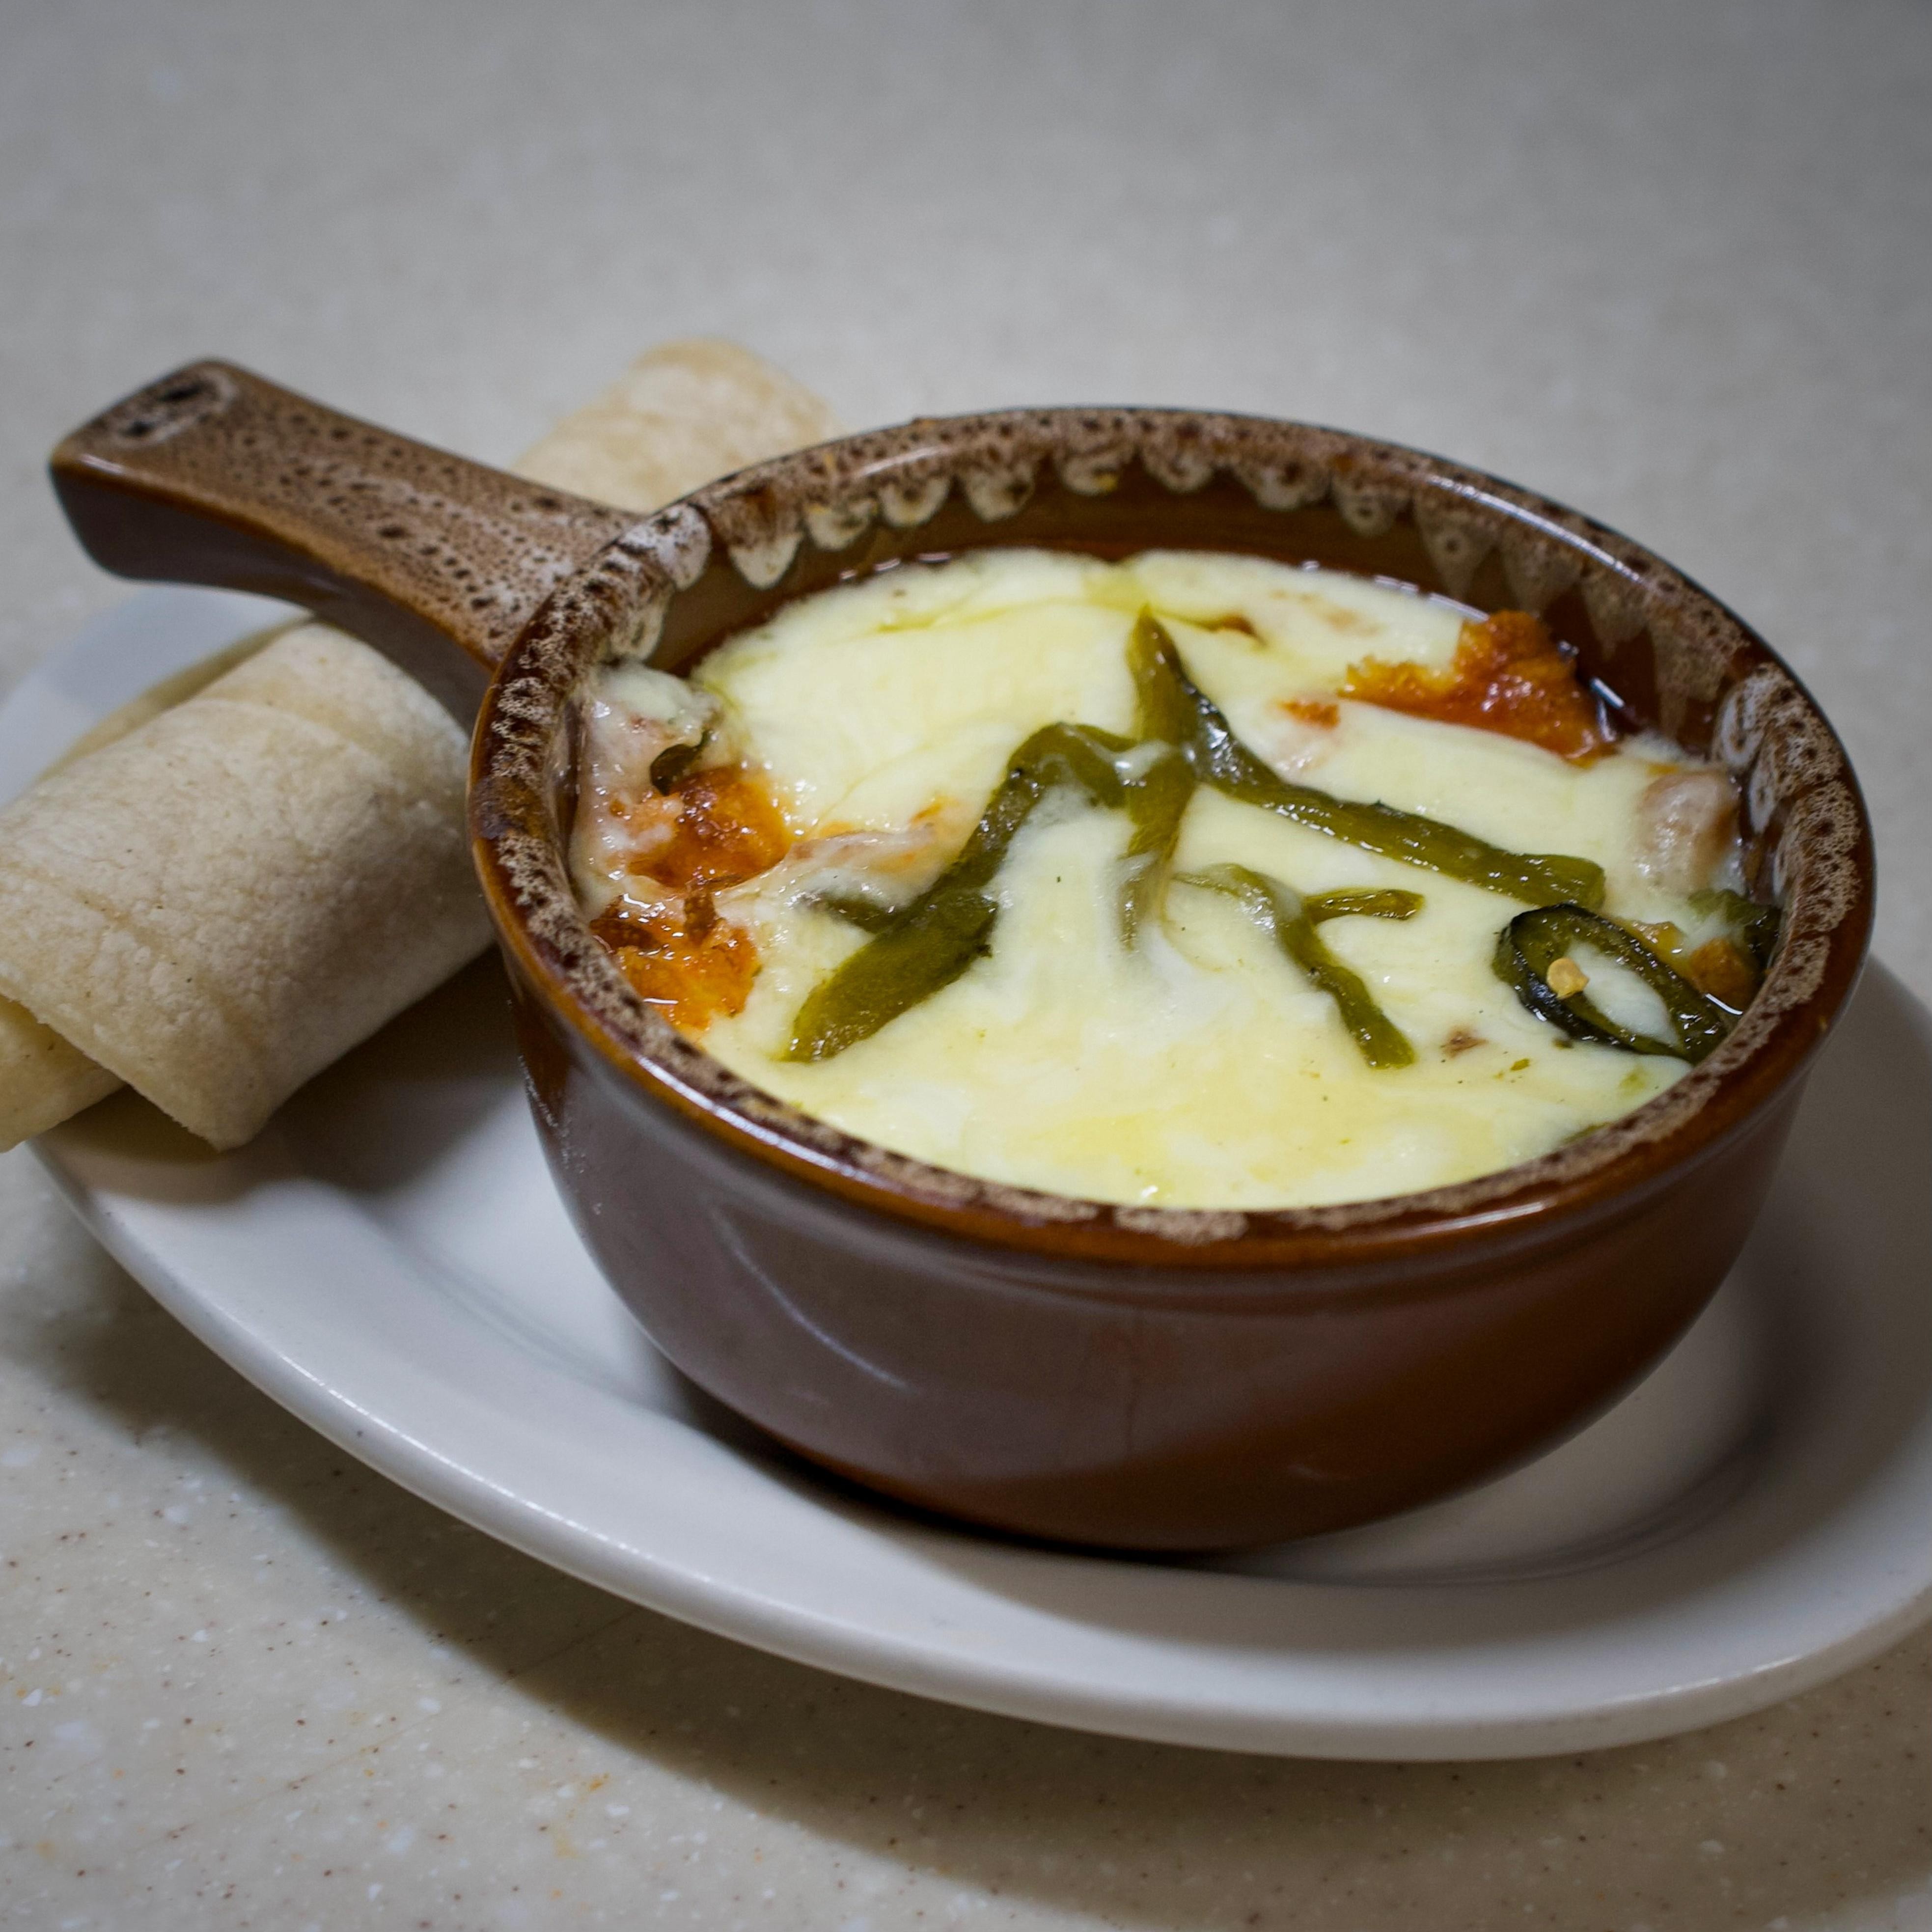 Baked cheese with poblano pepper